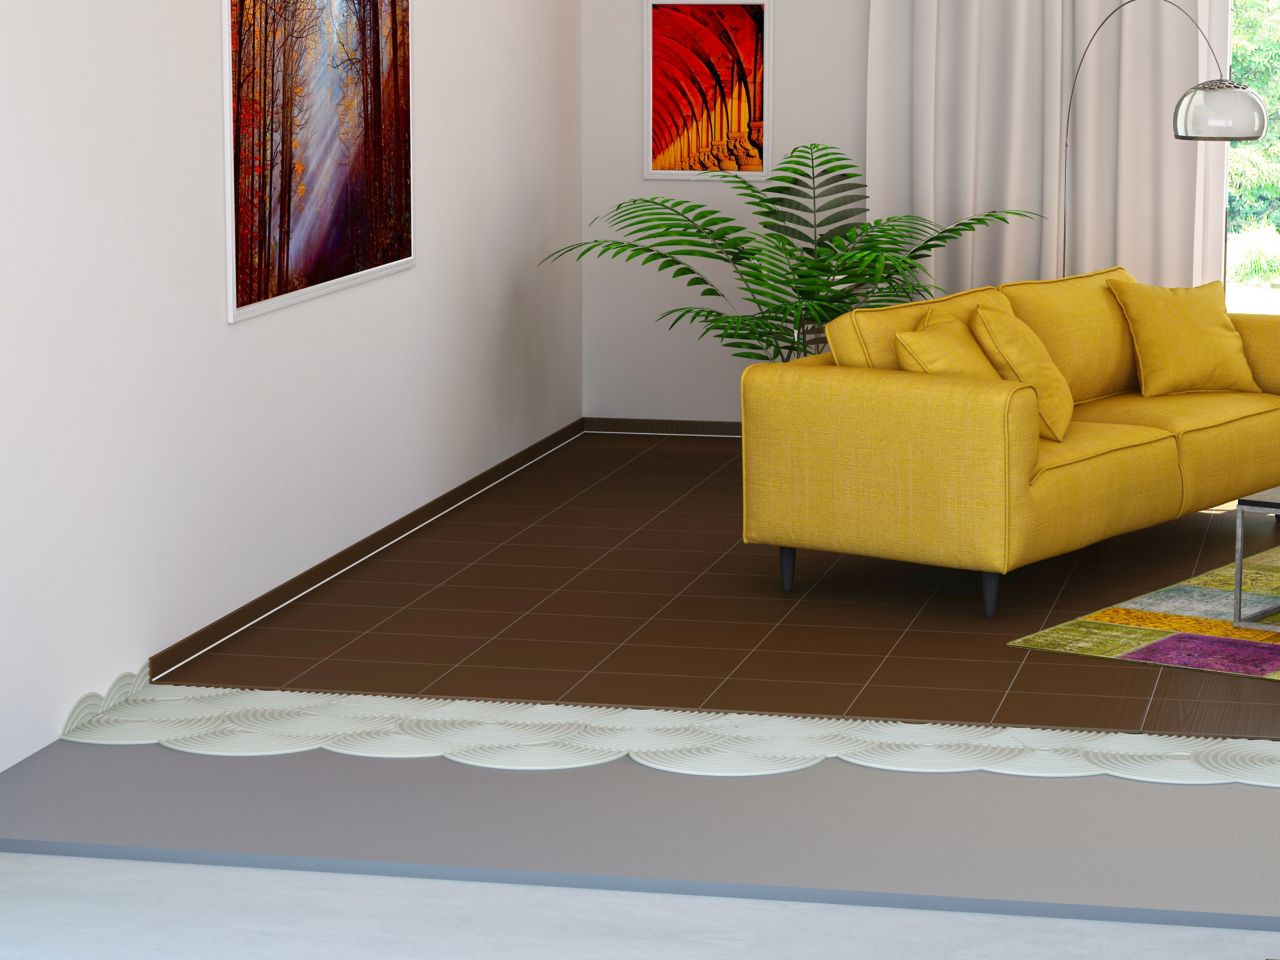 Illustration of tile setting adhesives in living room with yellow sofa